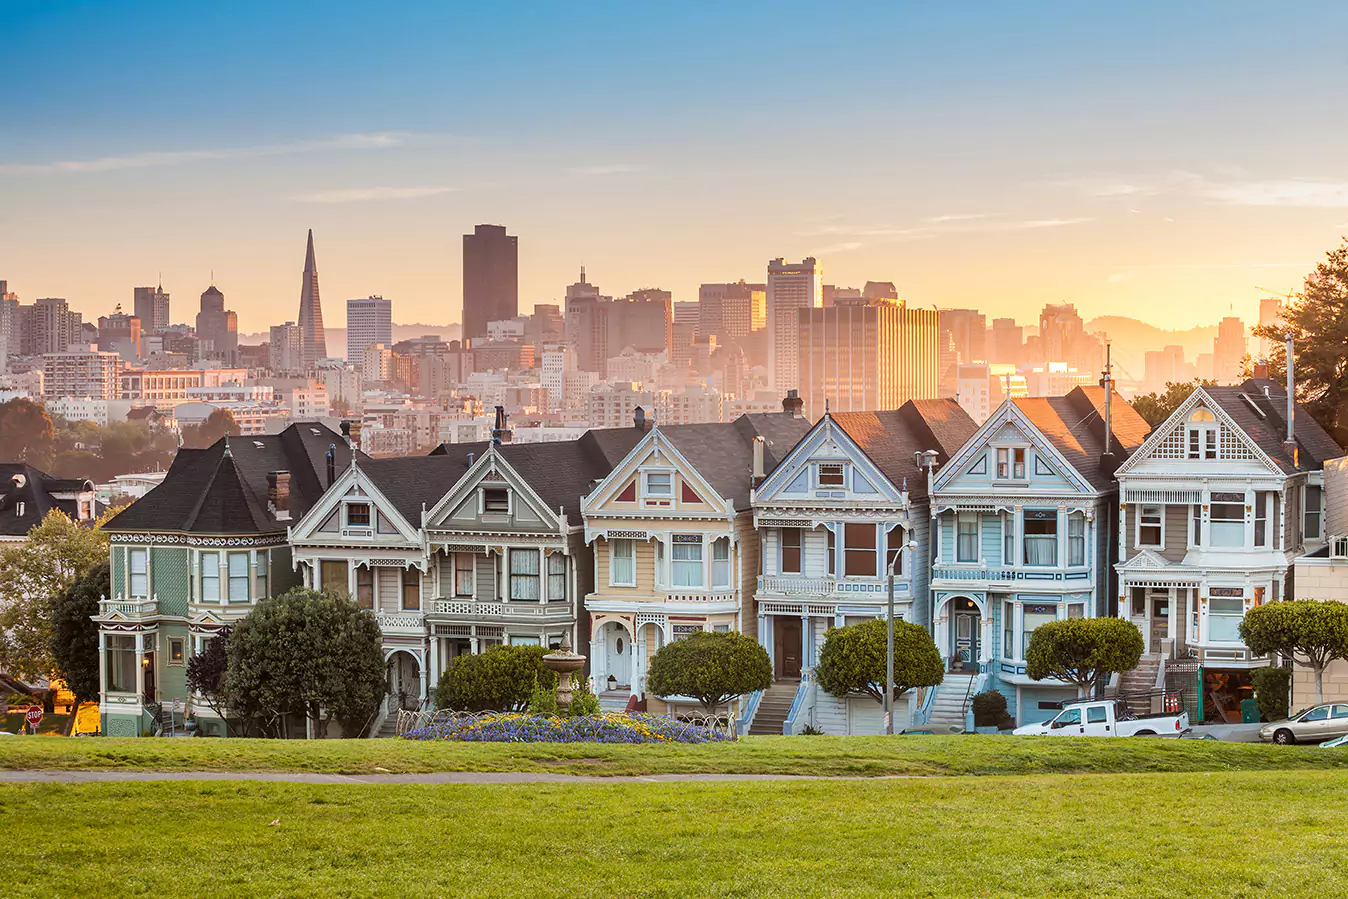 Sunset View of the Painted Lady Victorian-Style homes and the downtown San Francisco skyline from grassy knoll at Alamo Square